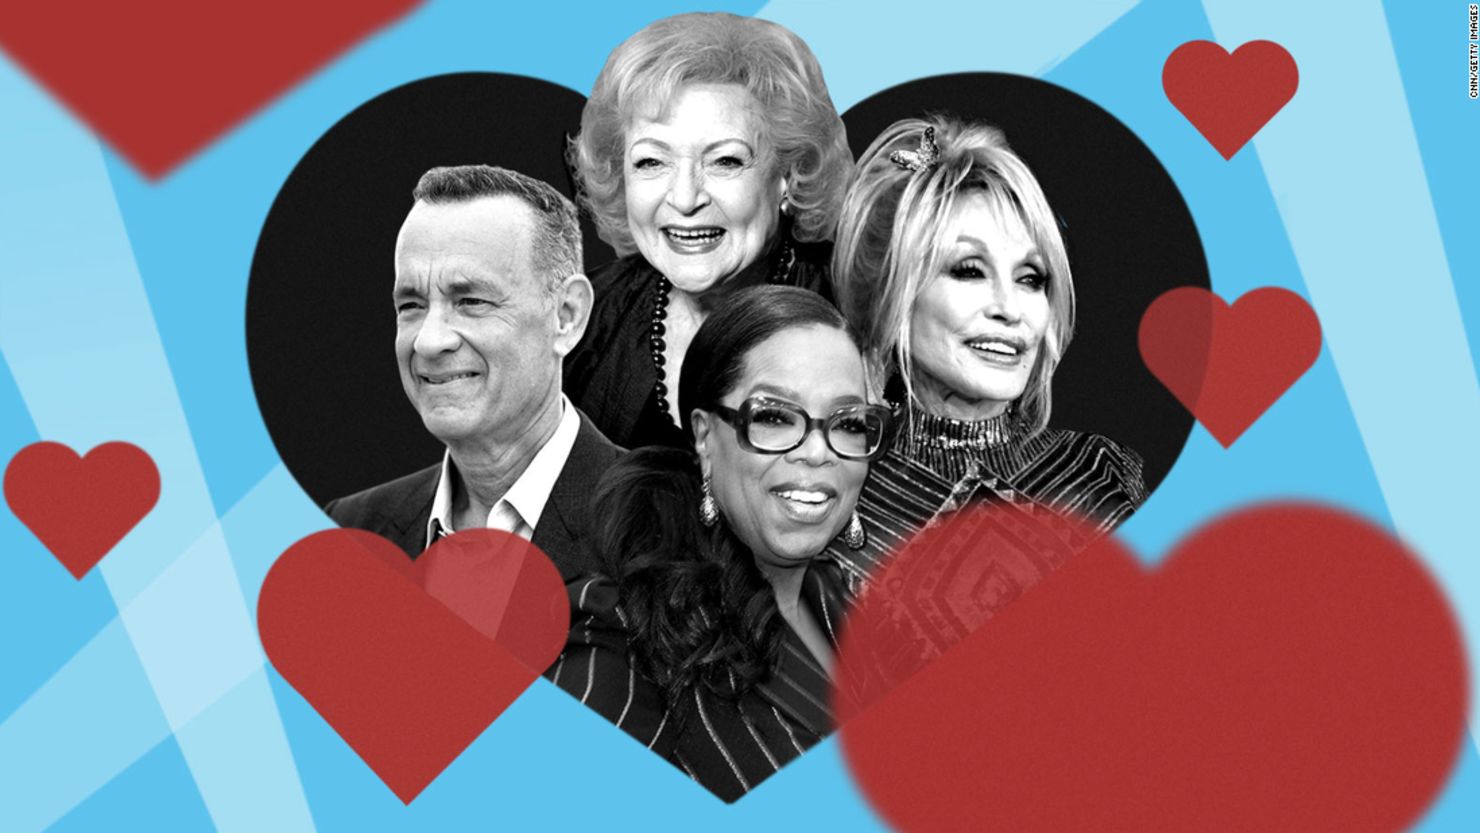 Some celebrities are so beloved that they appeal to most Americans, regardless of political and social differences. Dolly Parton, Tom Hanks, the late Betty White and Oprah are just some who have cemented reputations as American sweethearts.